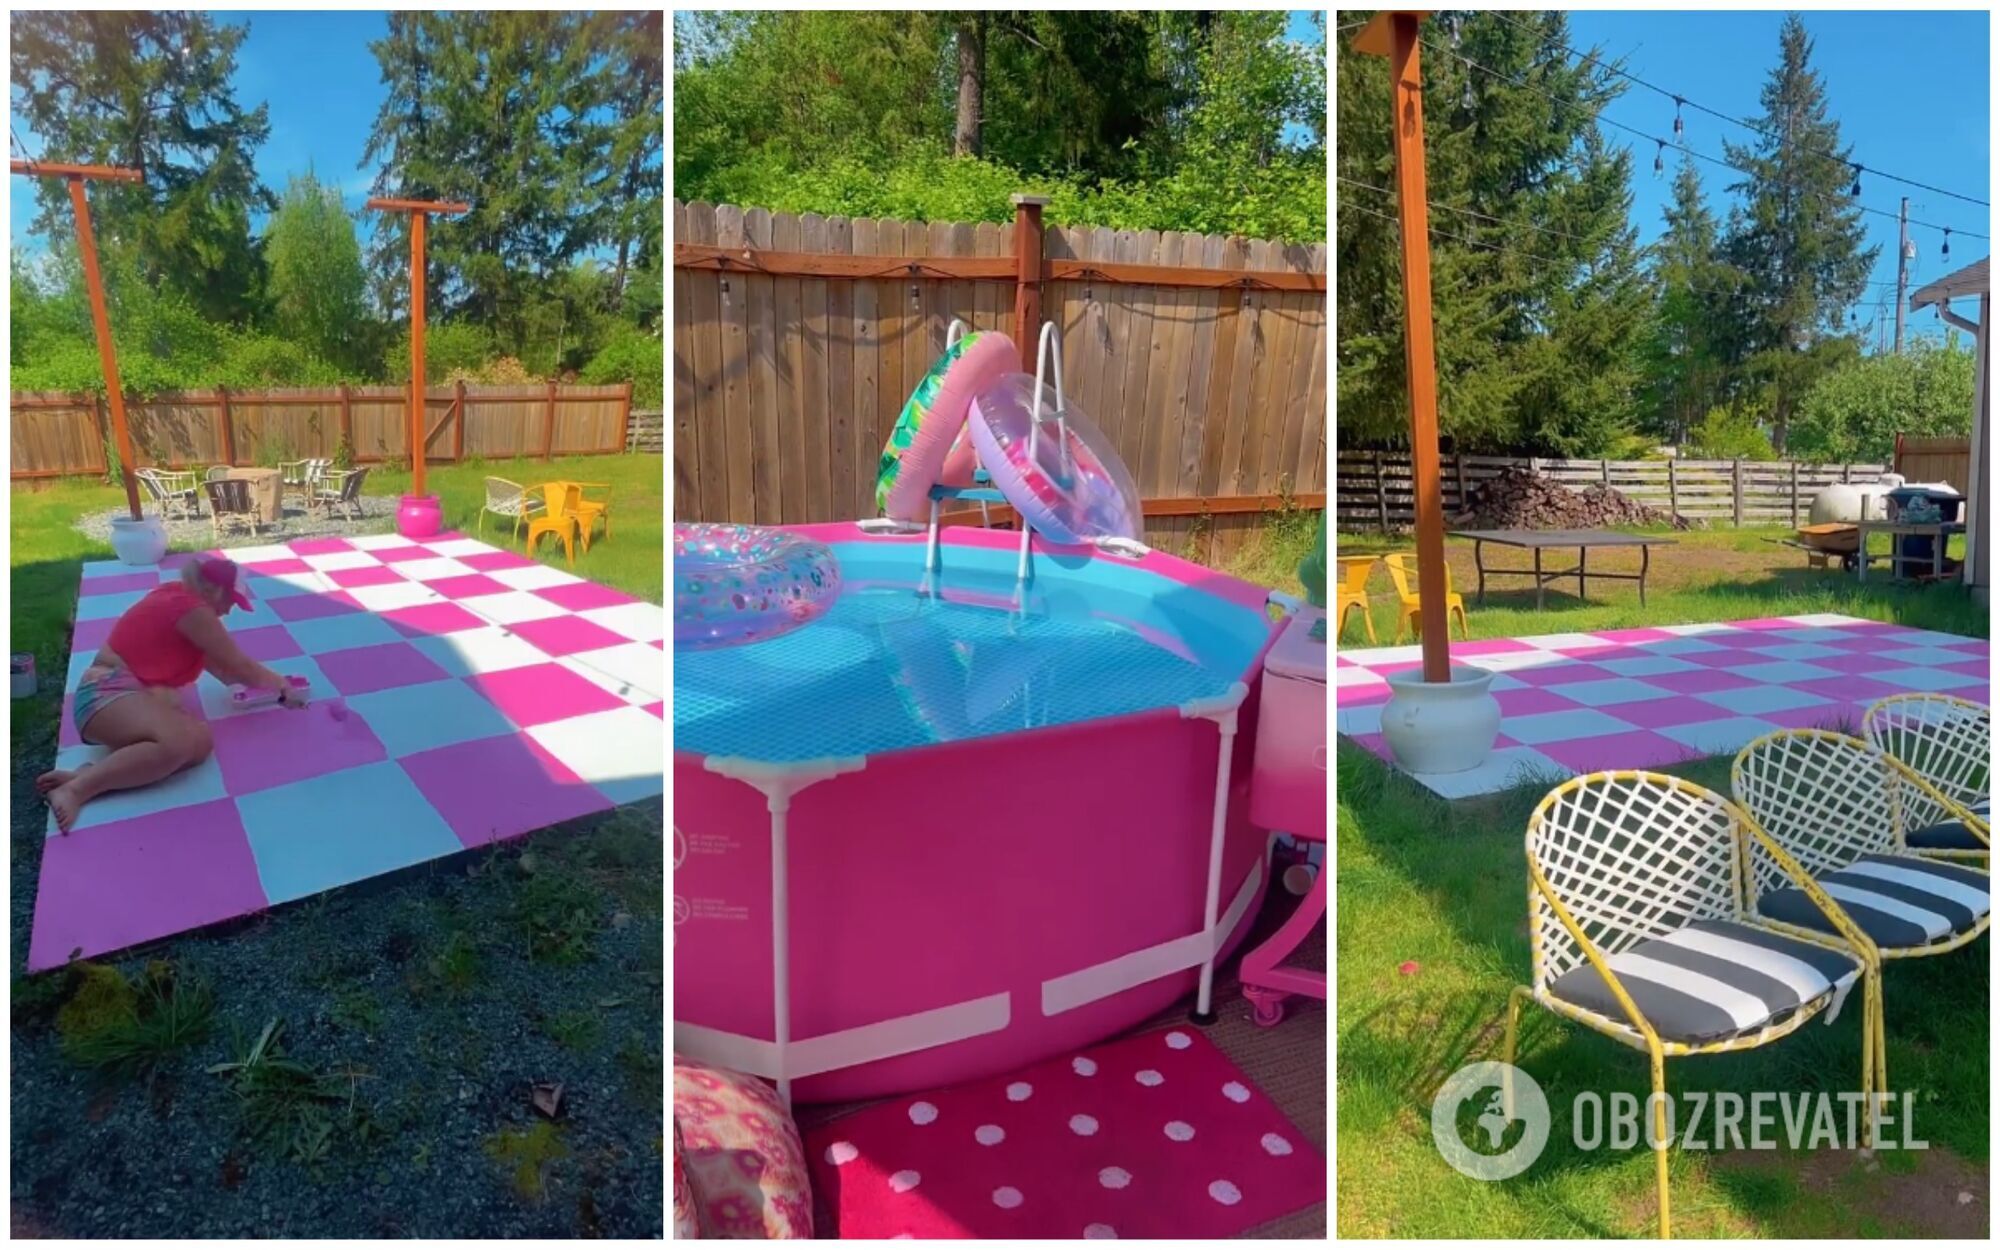 In the backyard, the American woman made an area with a swimming pool